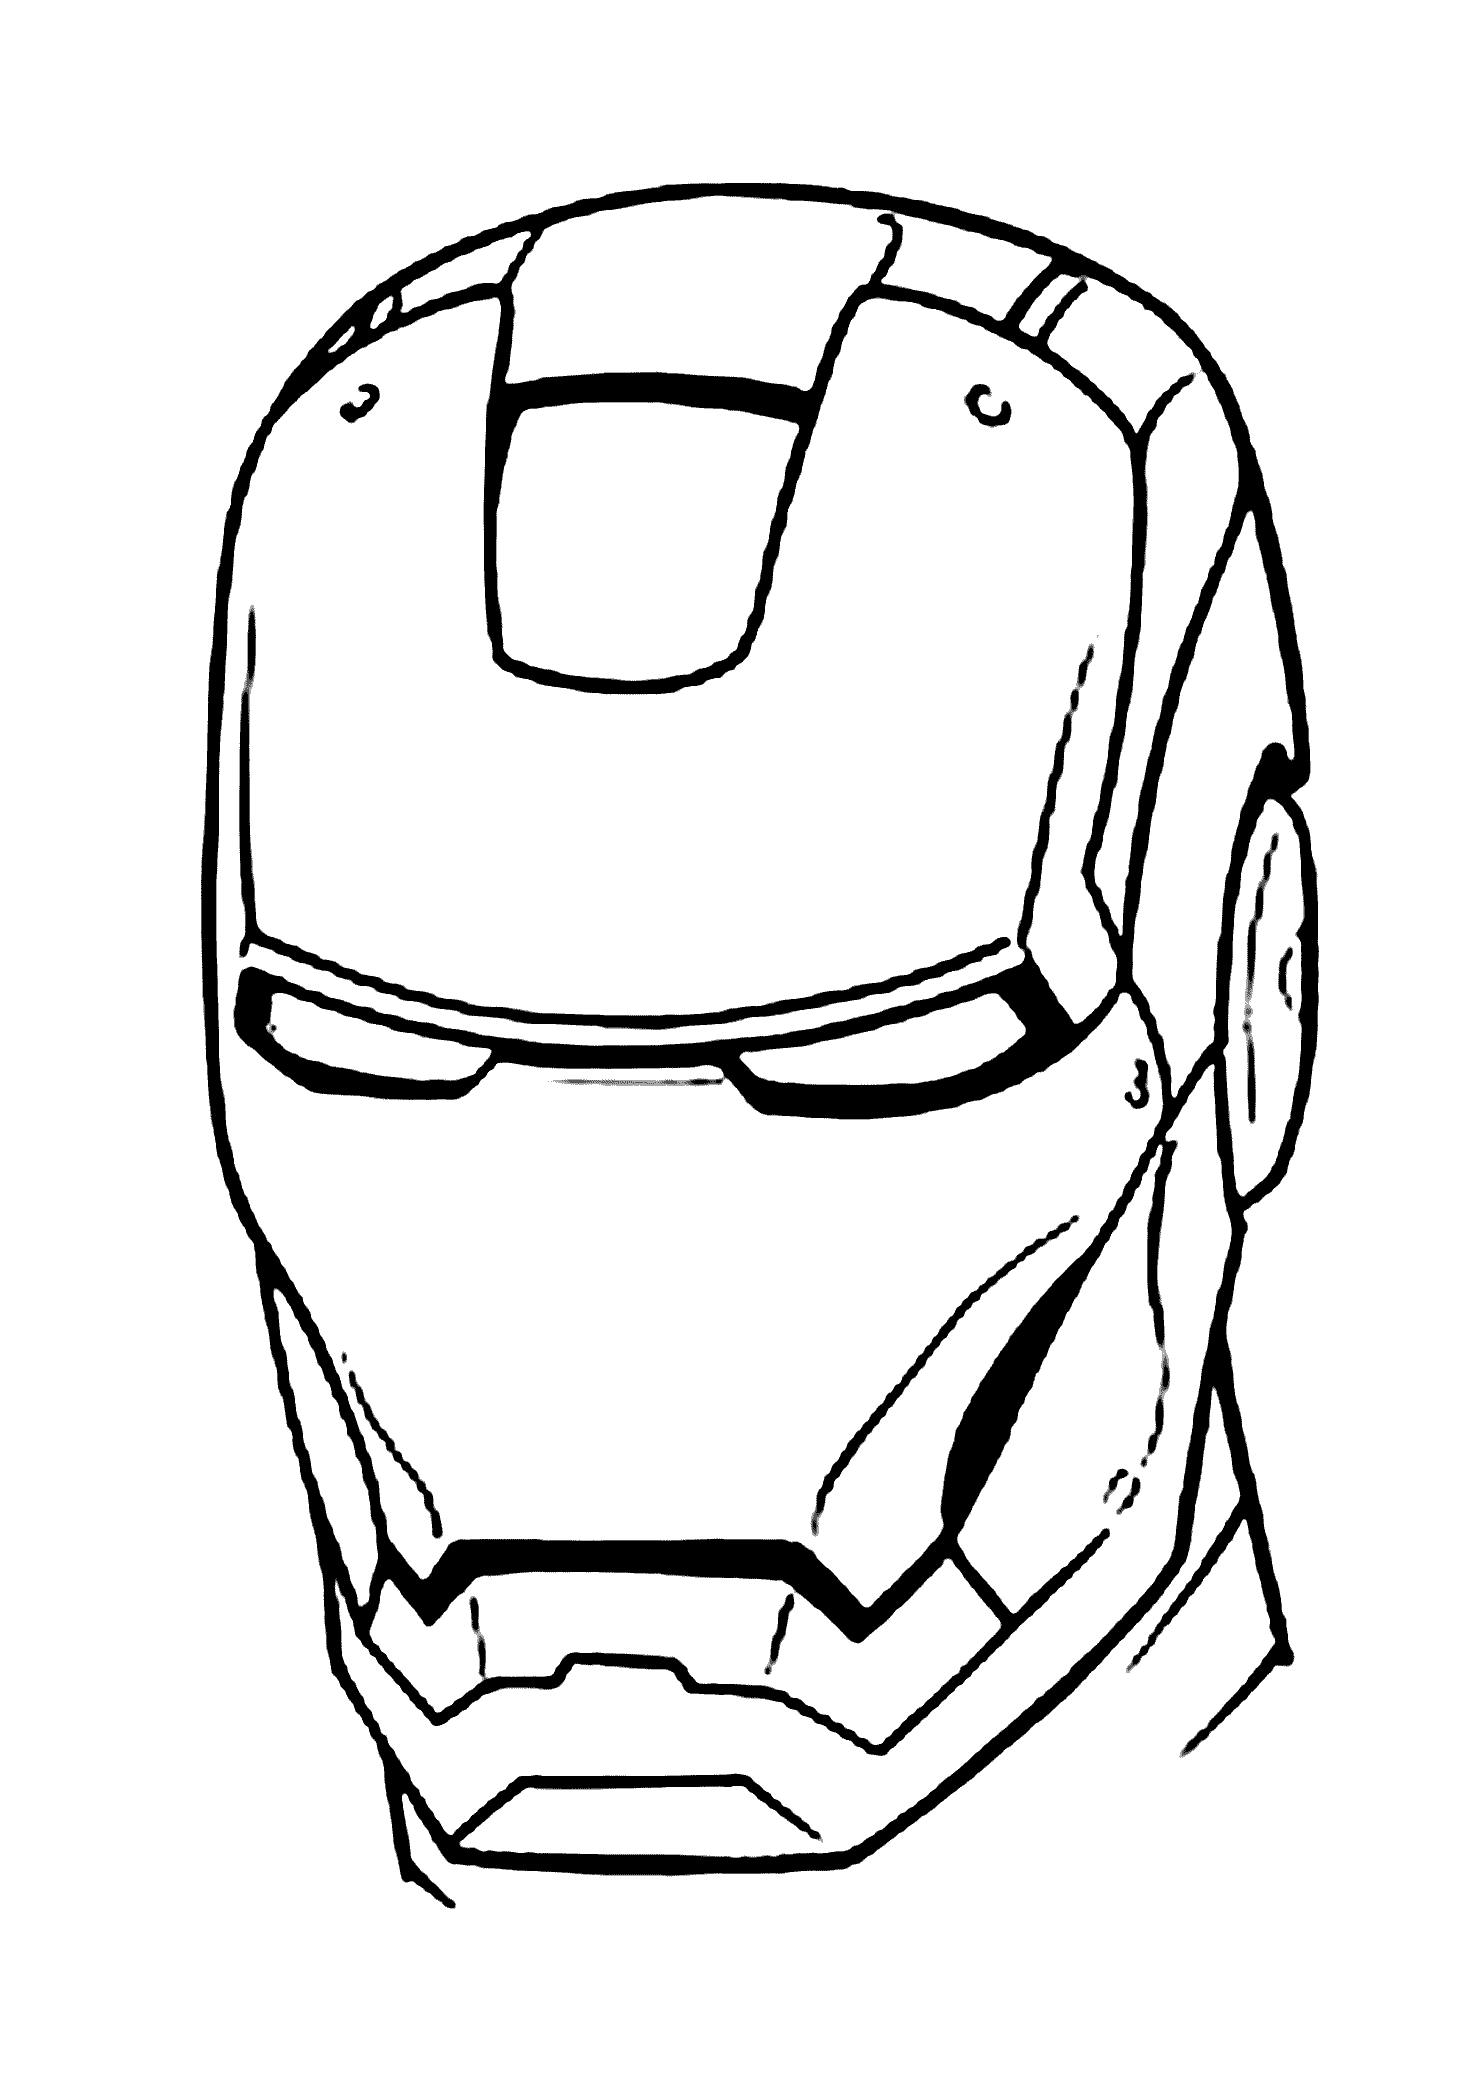 ironman drawings for kids